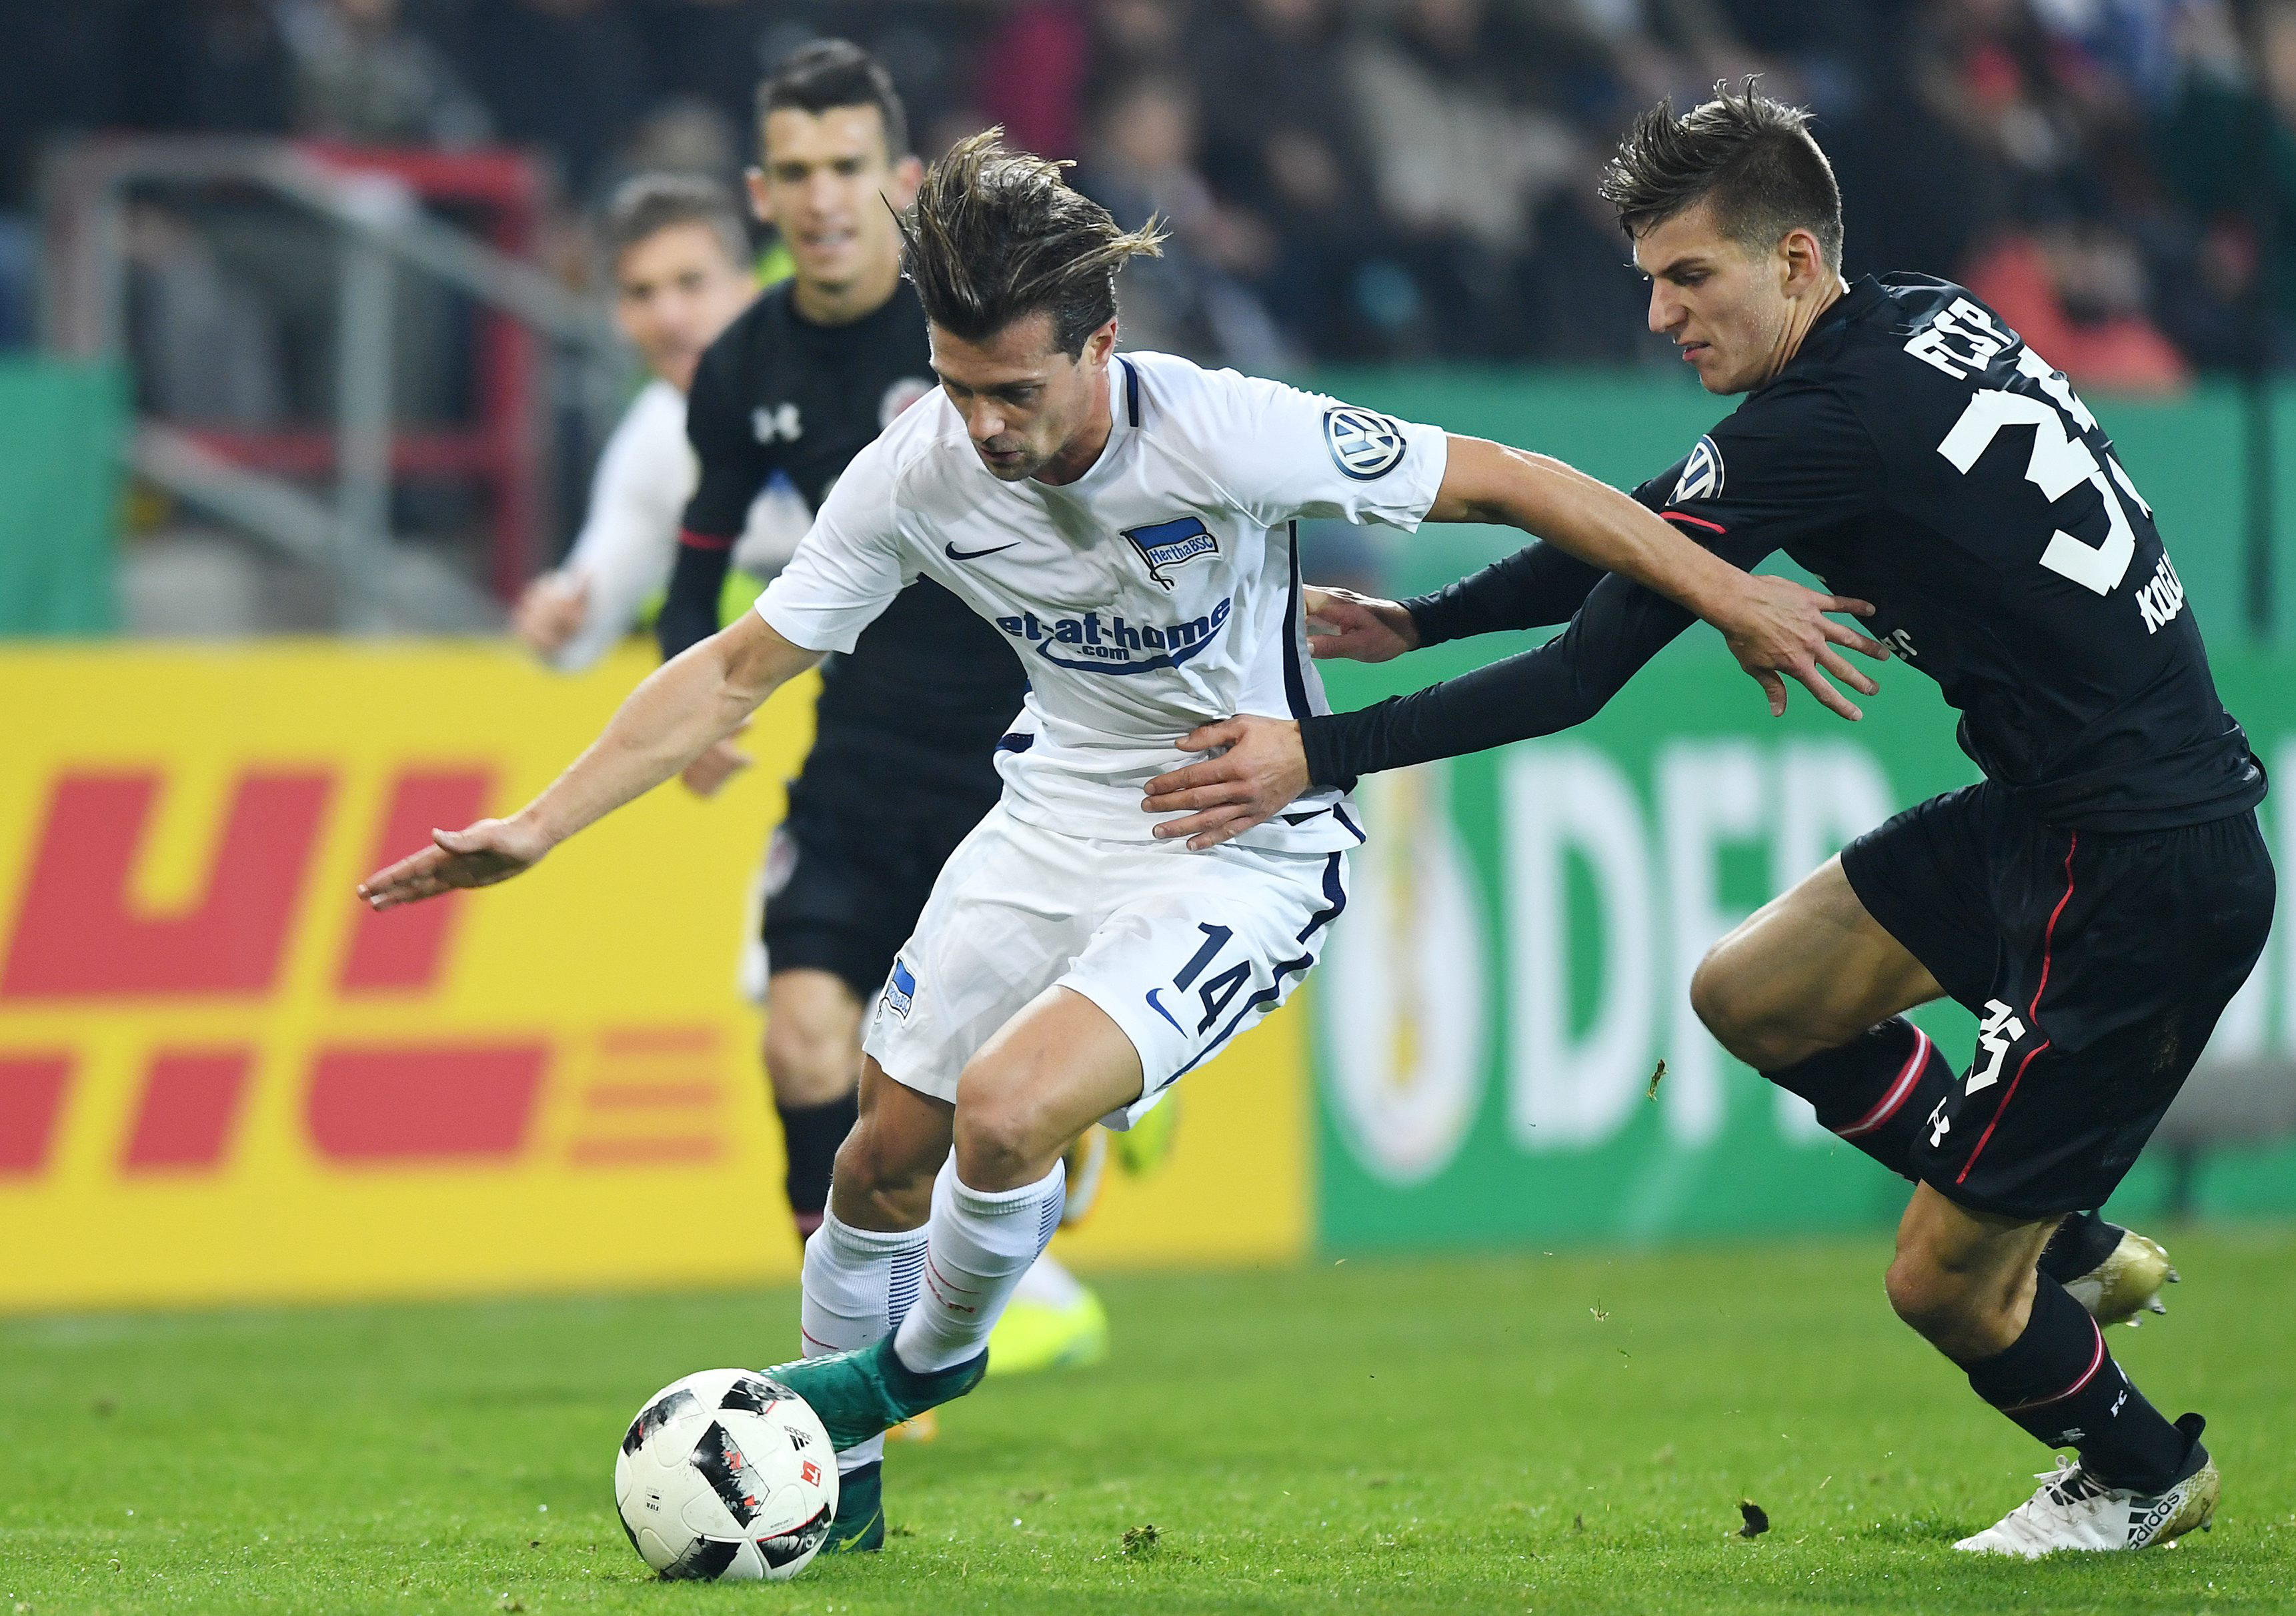 In the second round of the DFB Cup Brian Koglin often had to deal with Hertha's Valentin Stocker.